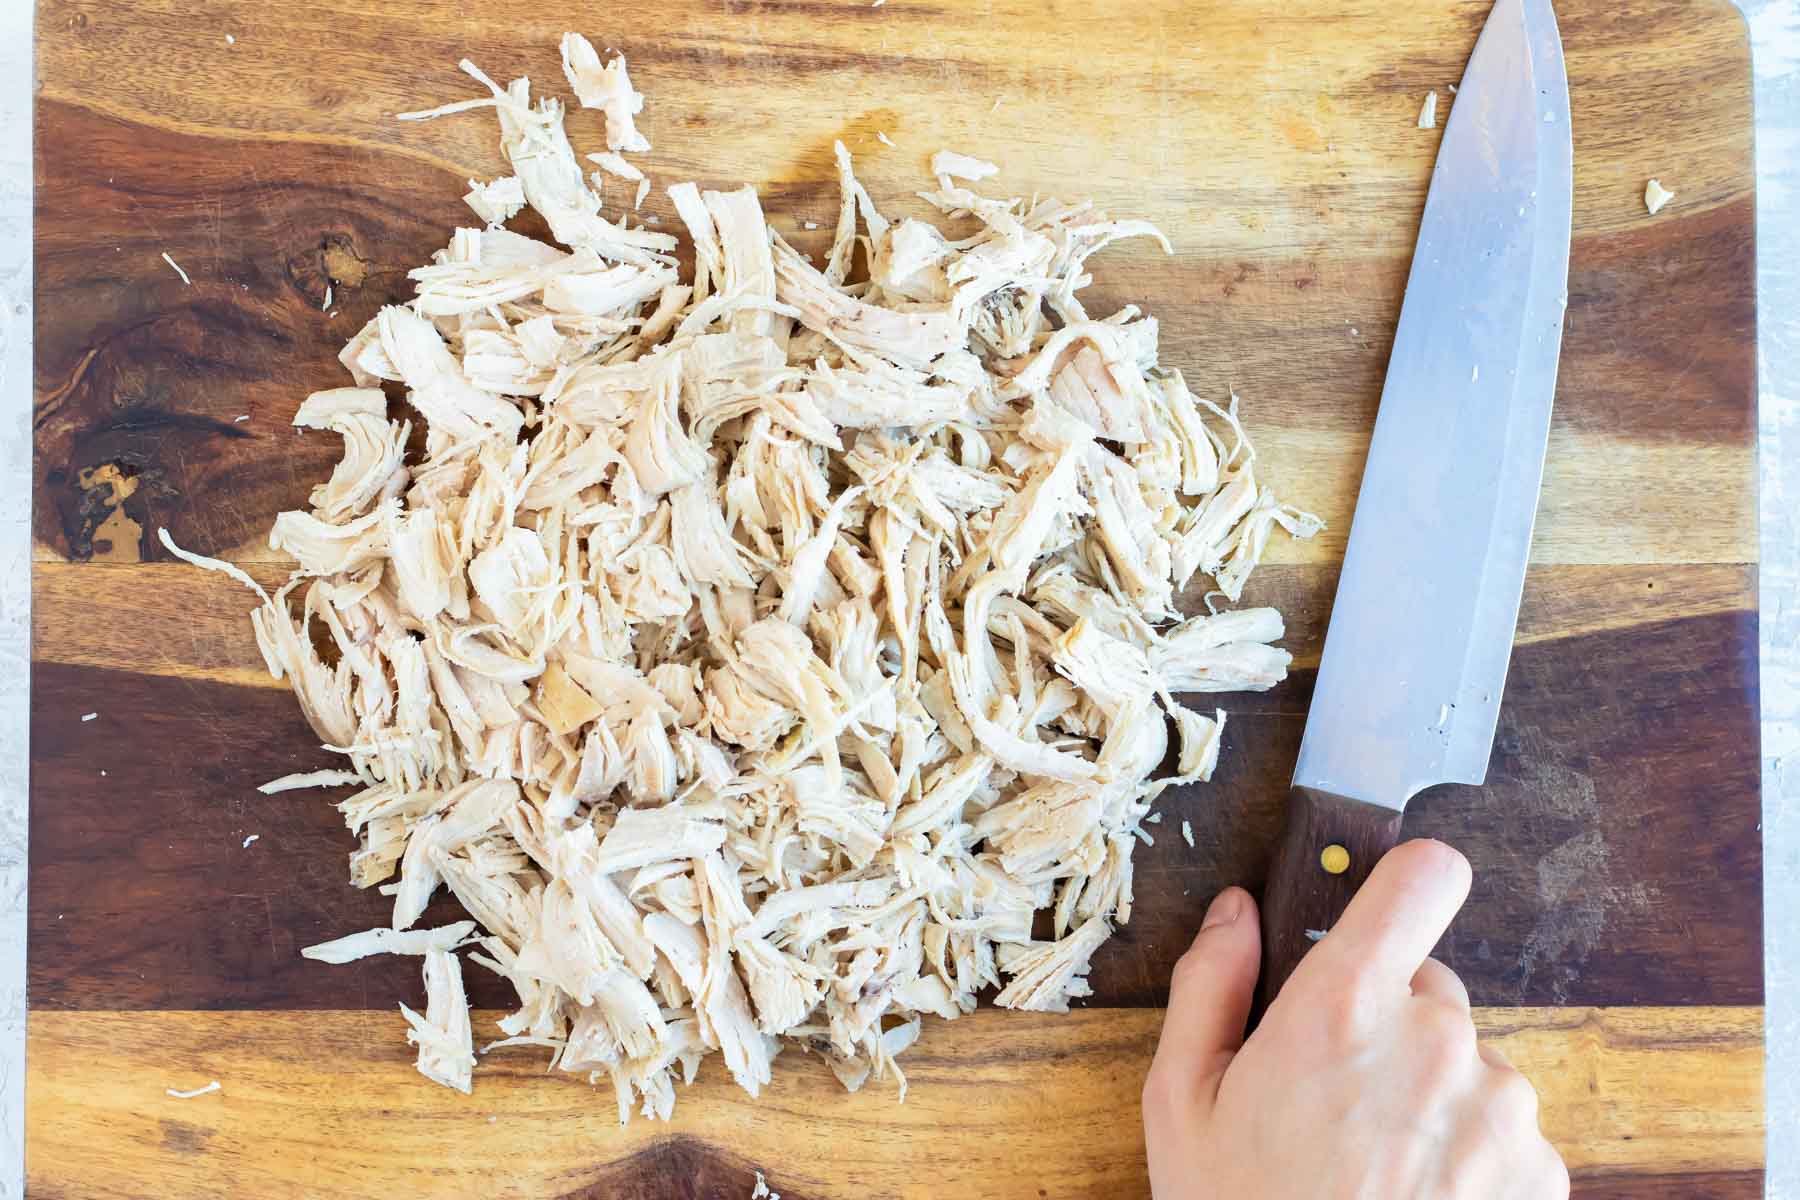 Chicken is chopped on a cutting board.